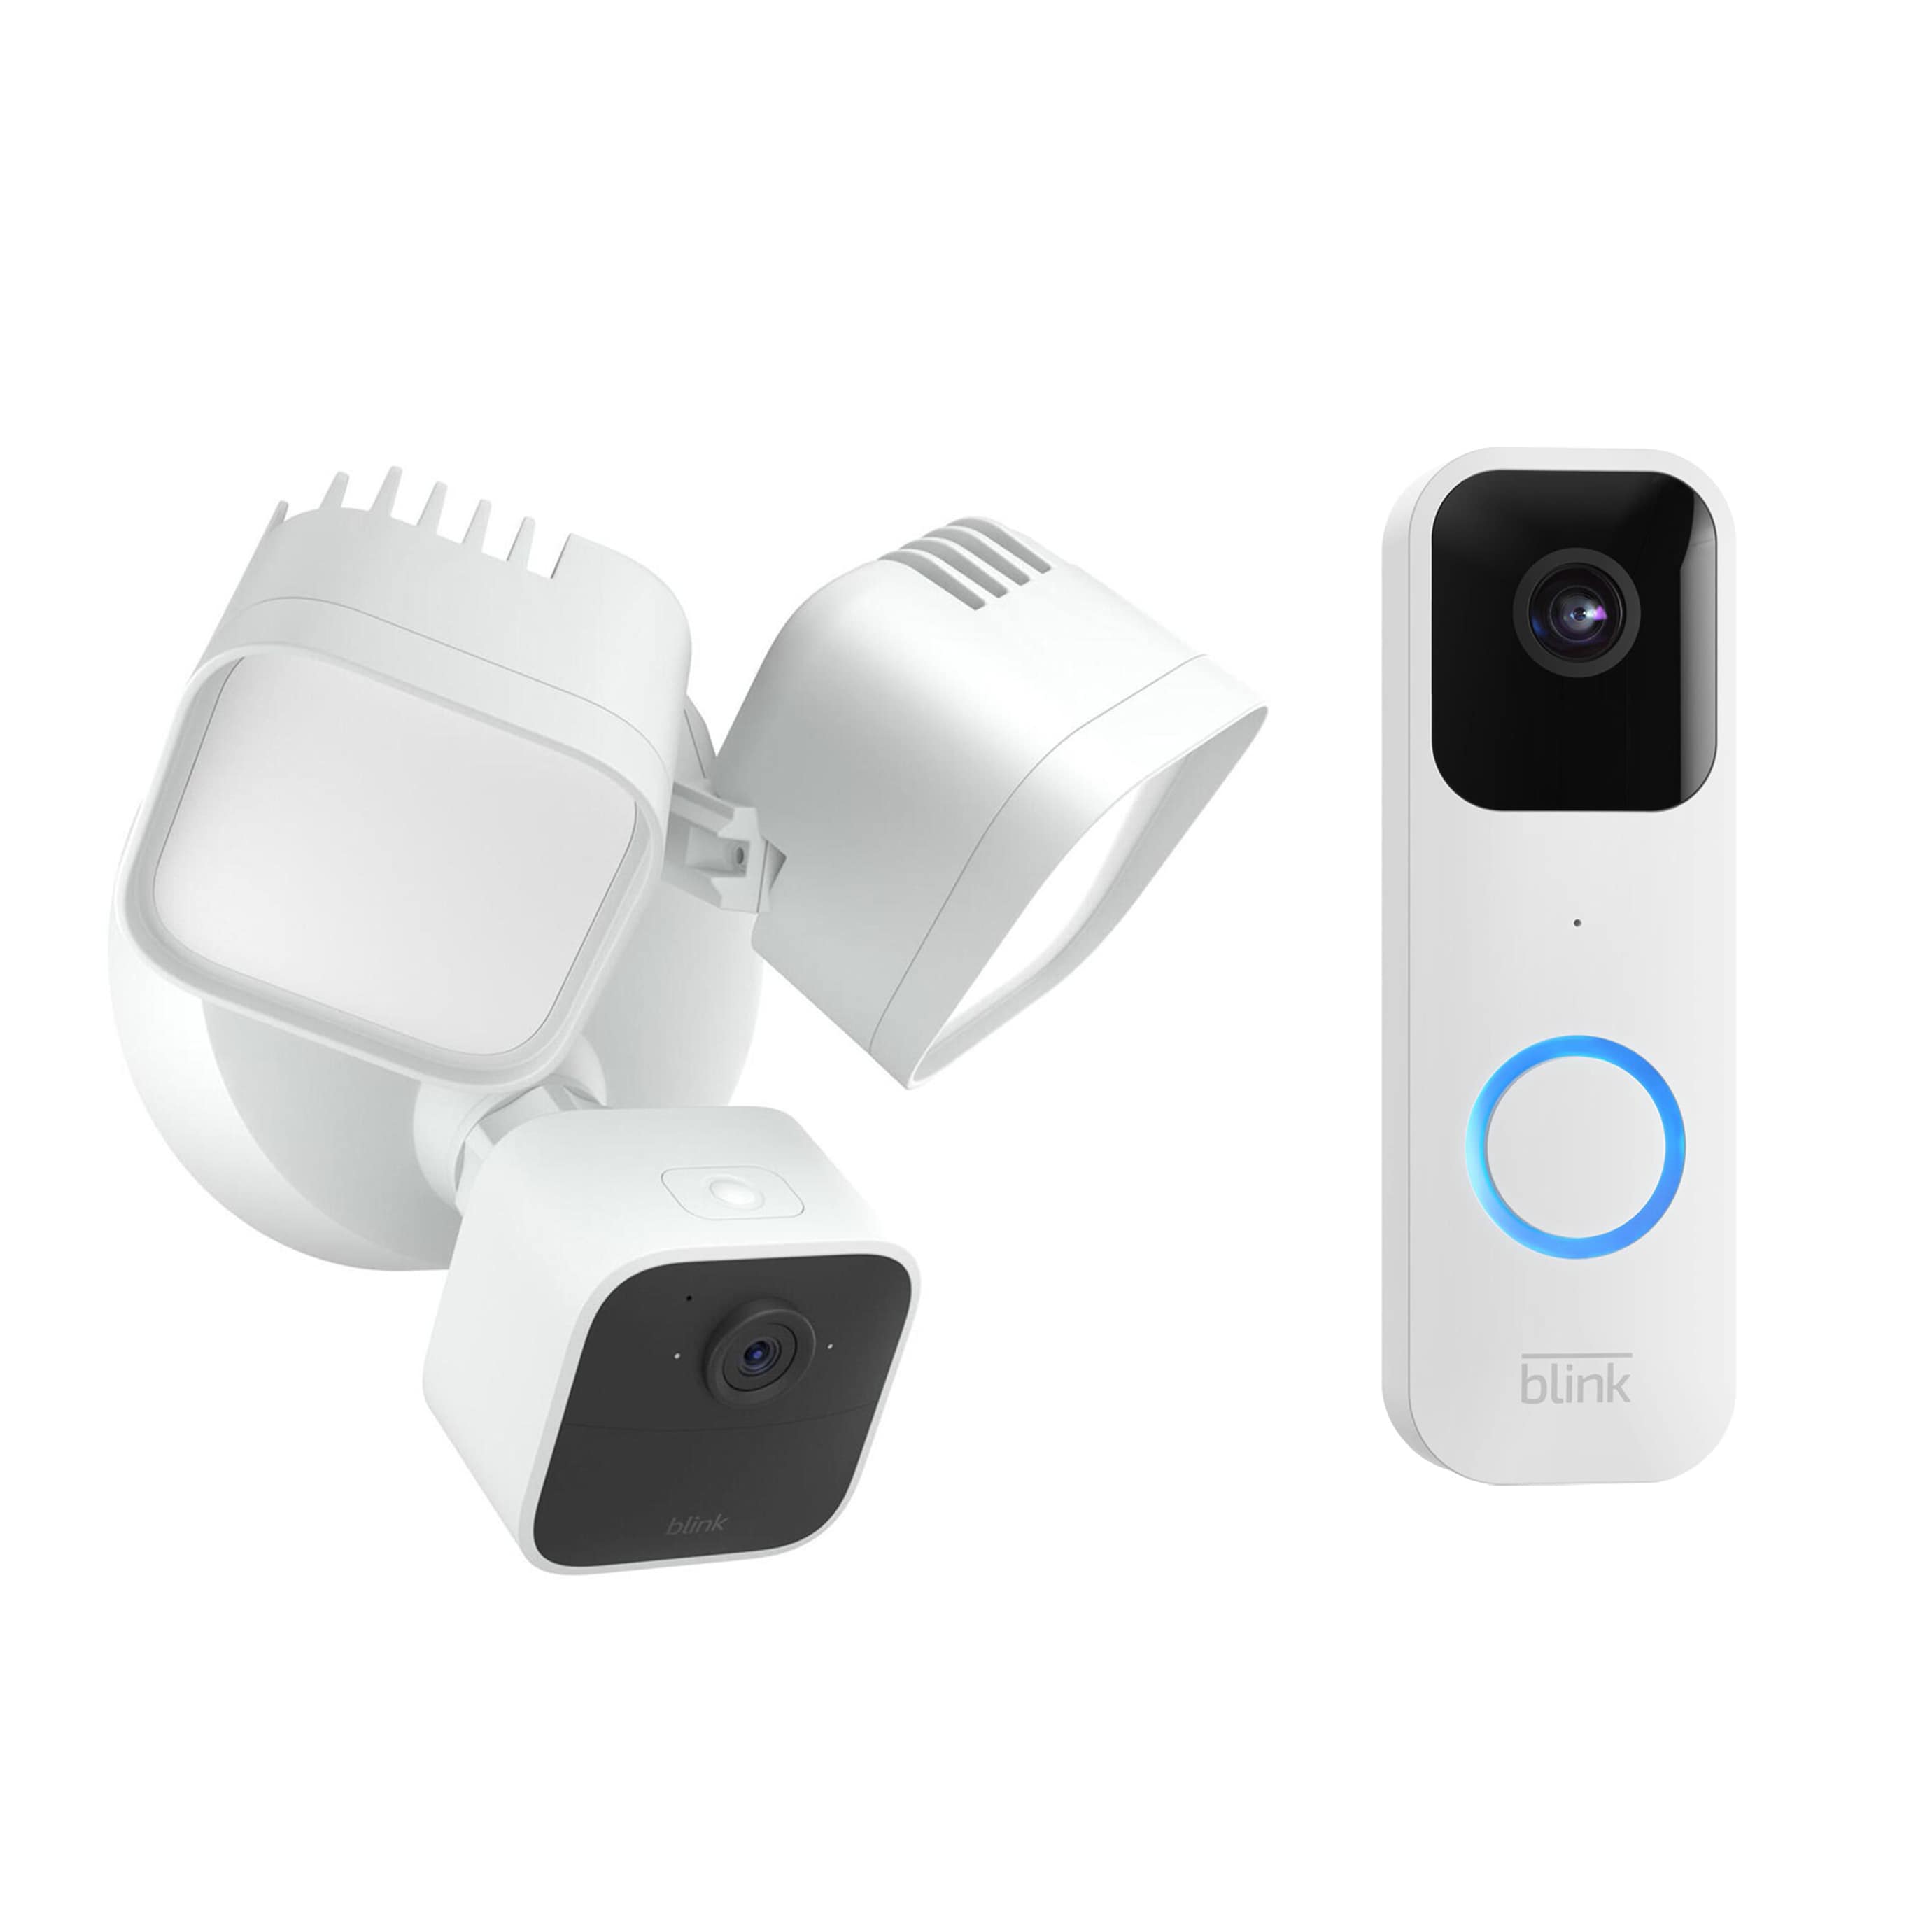 acquires connected camera, doorbell, and home security company Blink